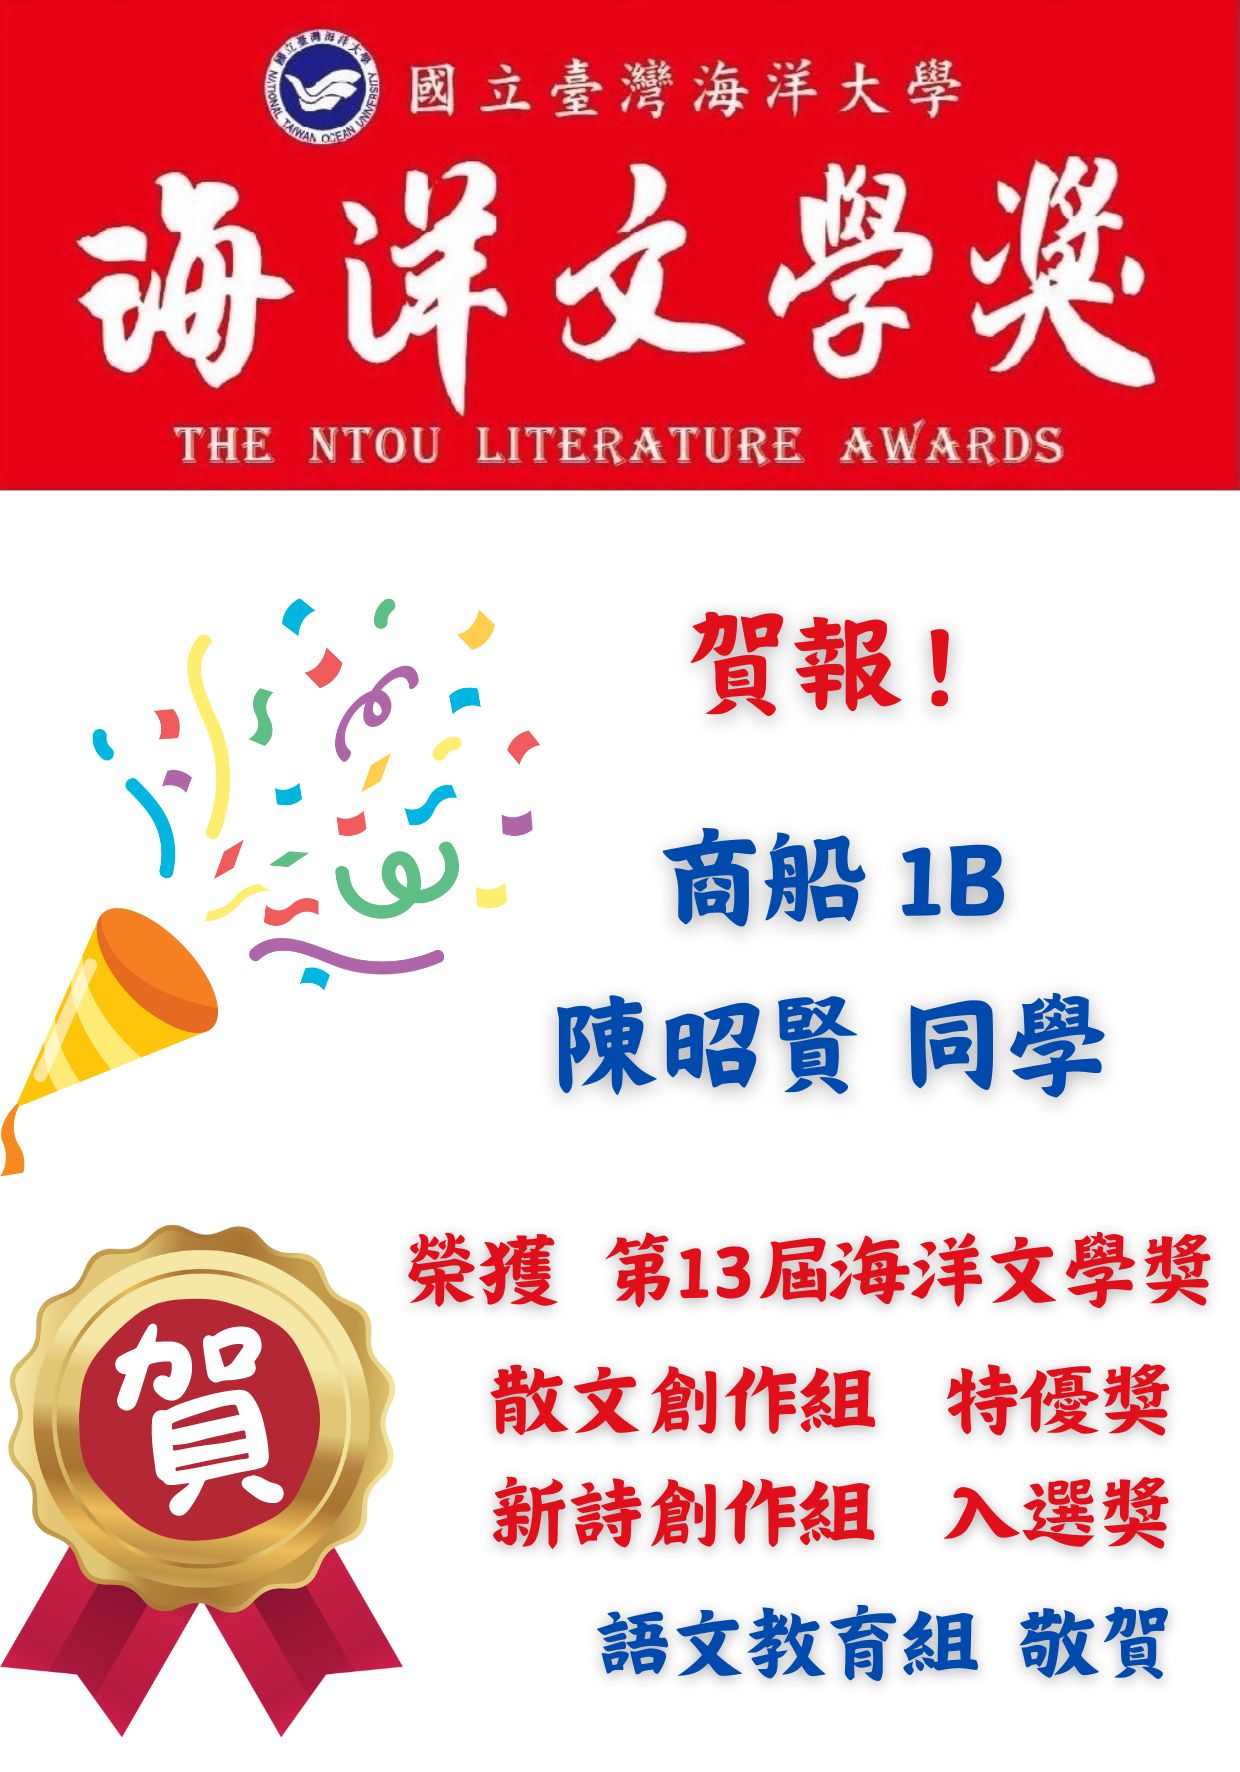 Congrats to The 13th NTOU Literature Awards Winner